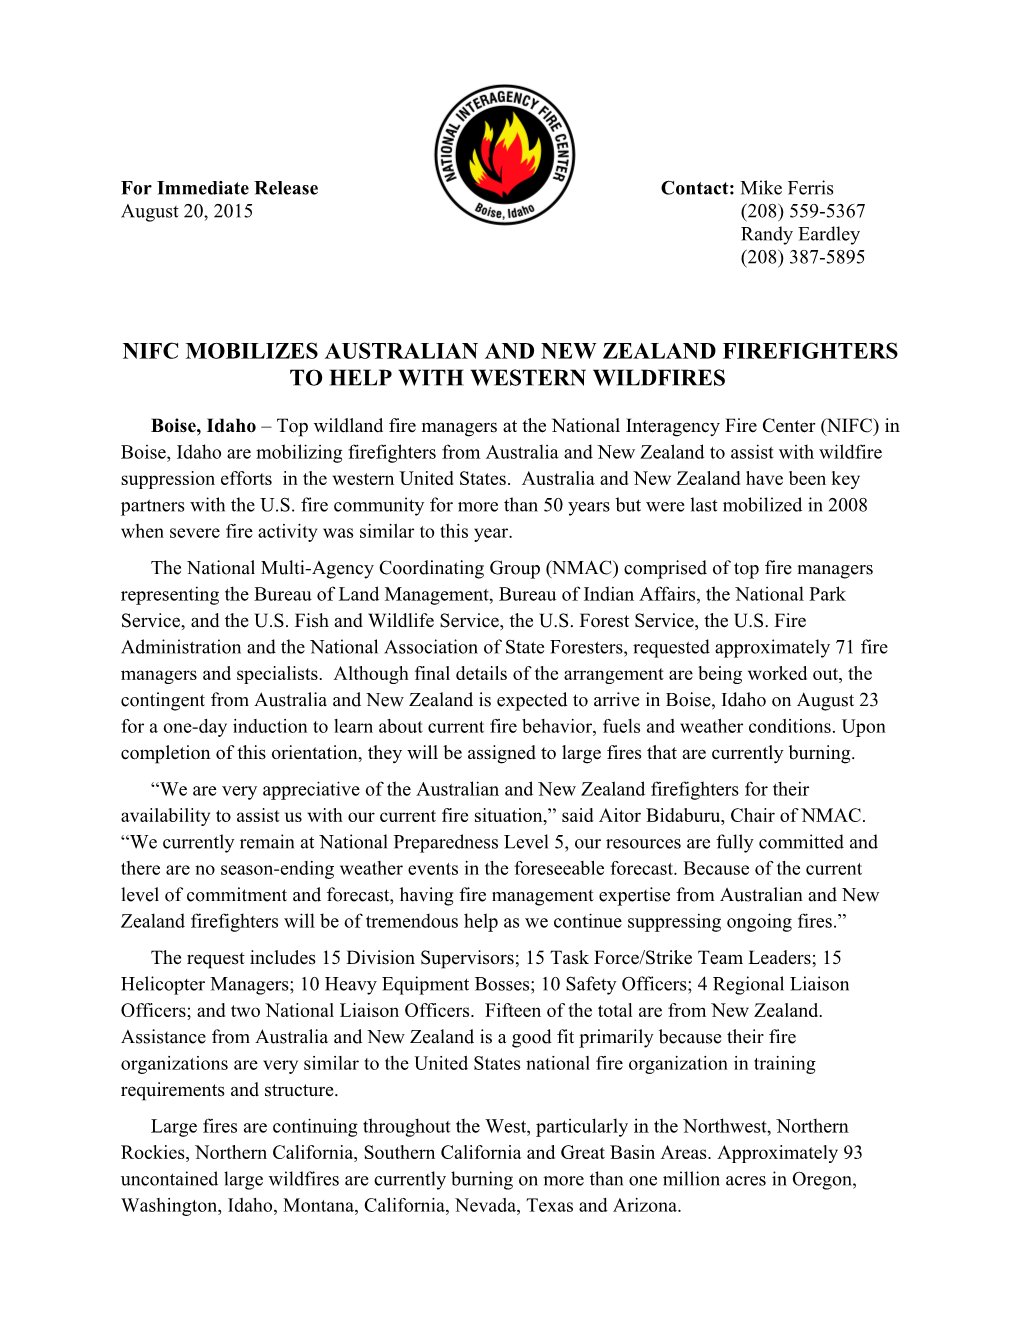 Nifc Mobilizes Australian and New Zealand Firefighters